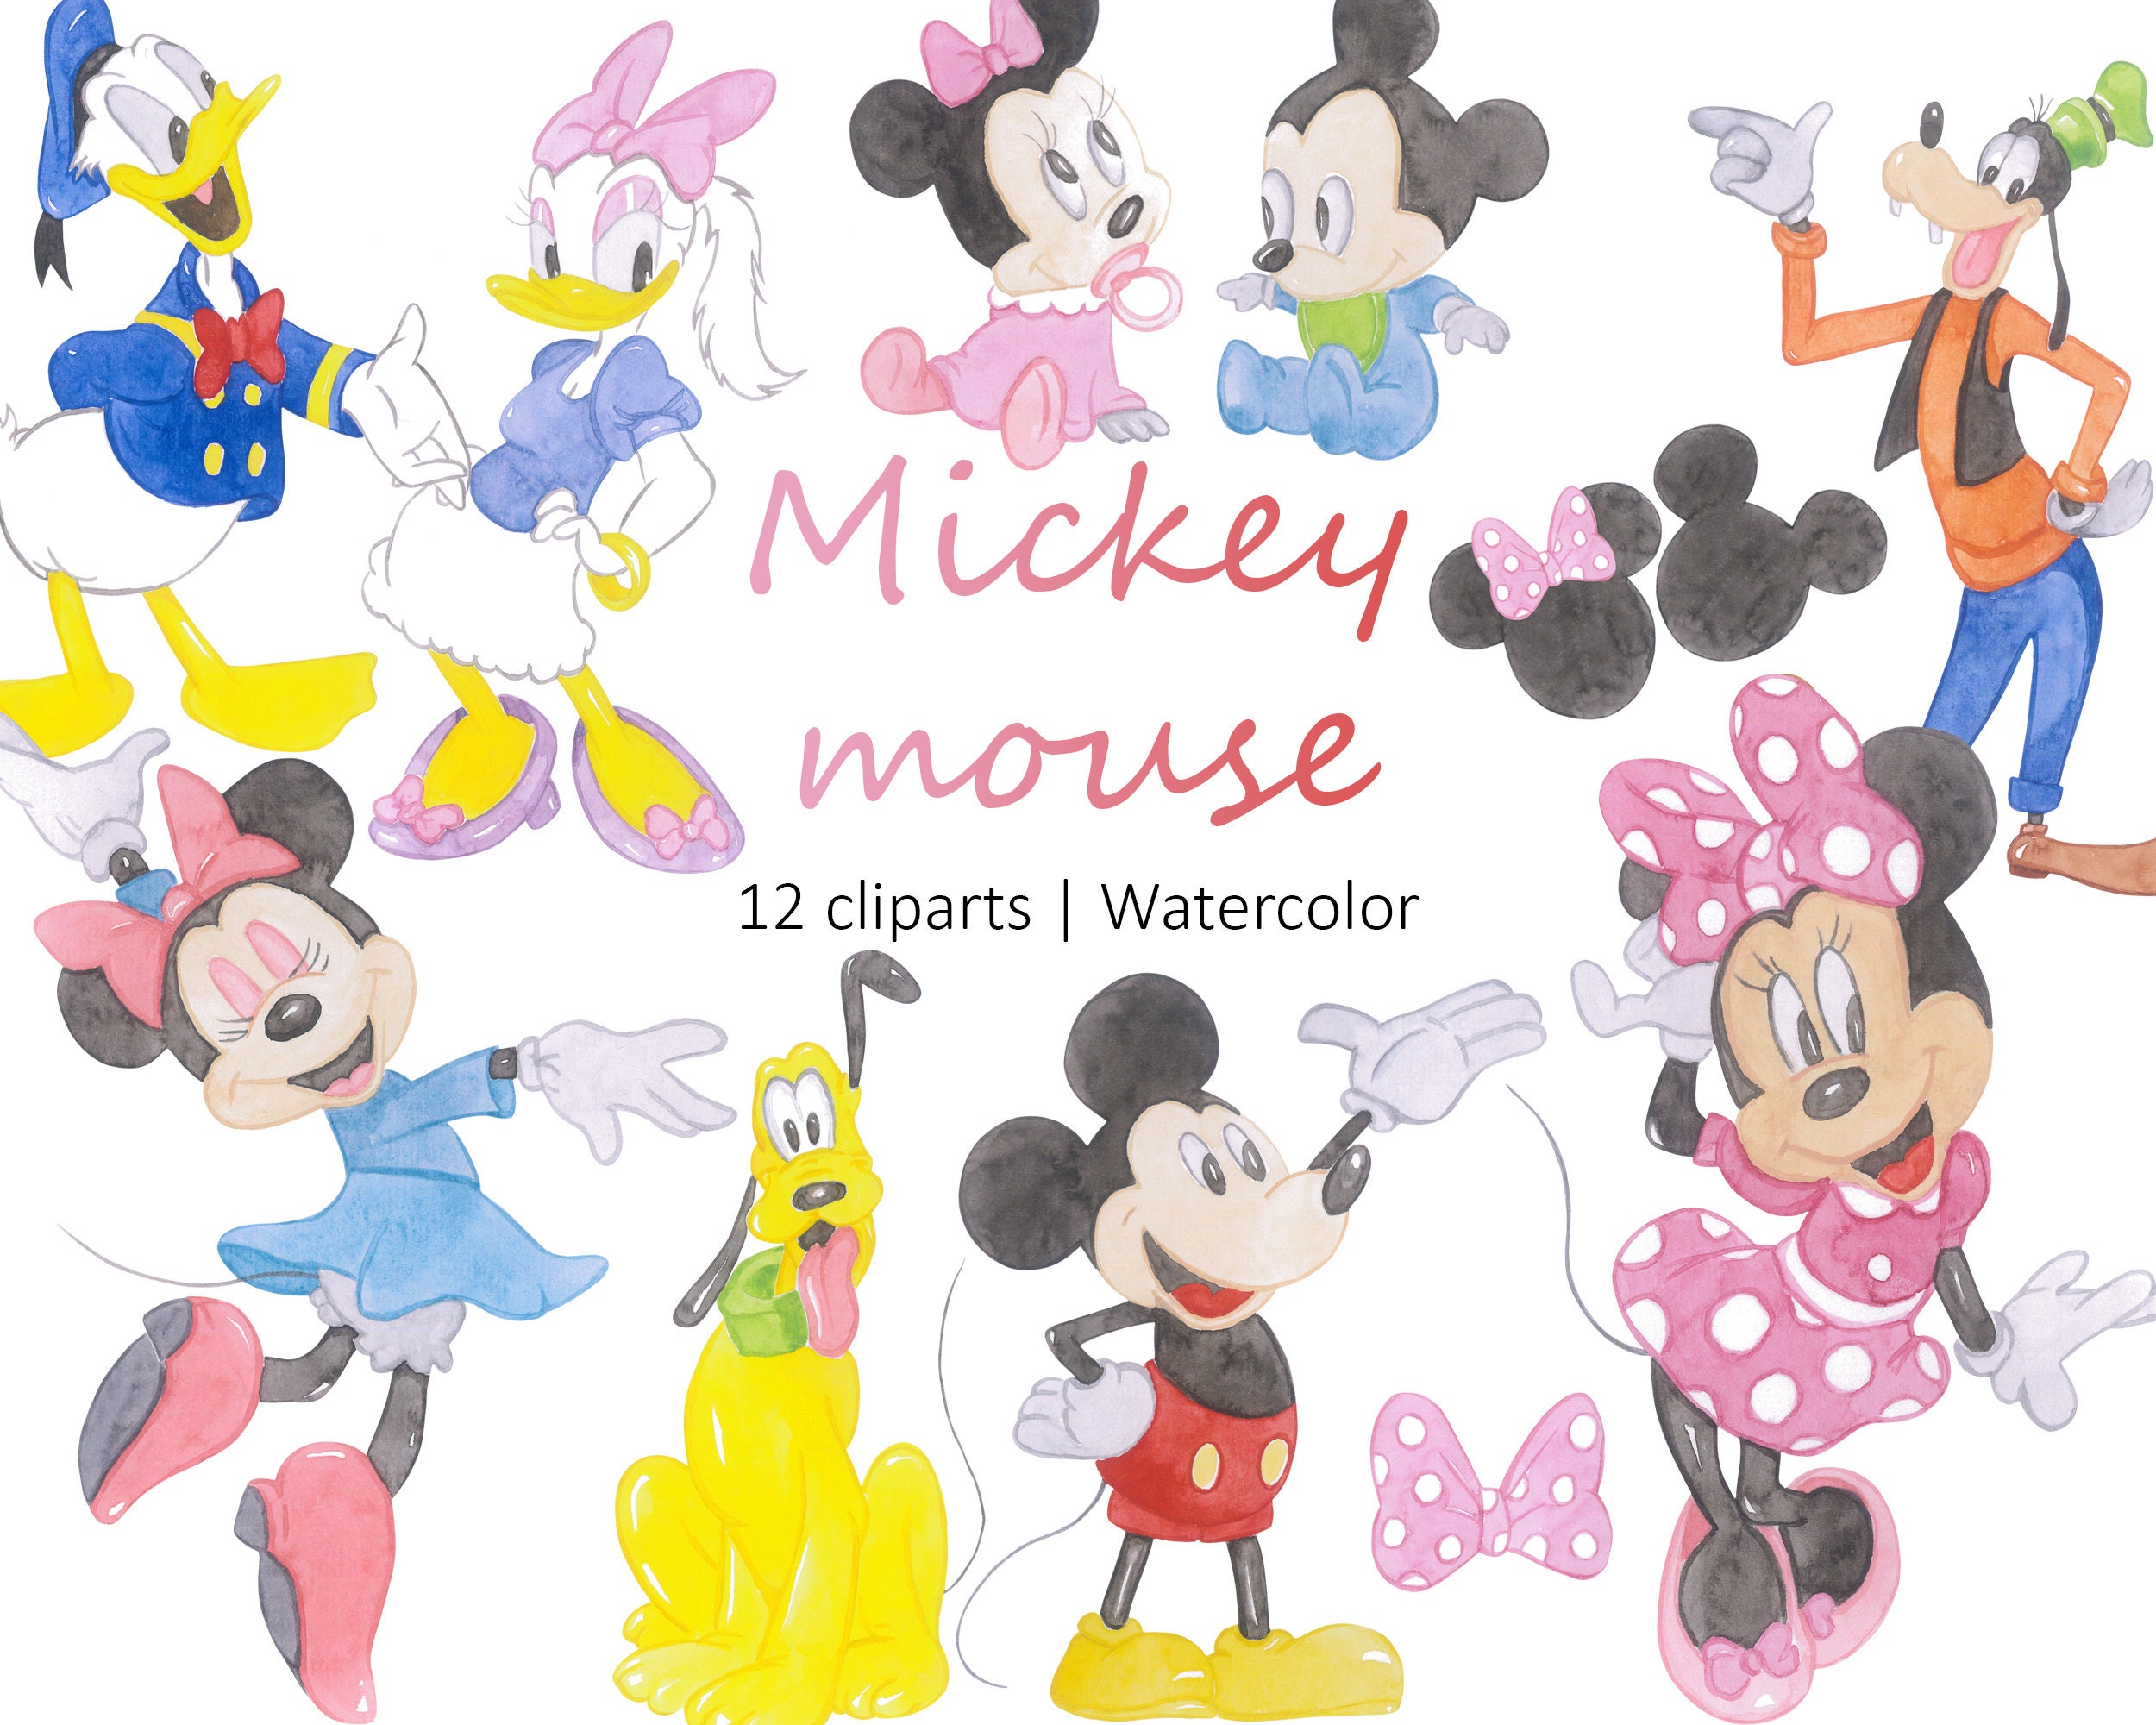 Mickey Mouse and Friends Watercolor Clipart, Minnie Mouse and Friends  Clipart, Mickey and Minnie Clipart Set, PNG & JPG Digital Download 